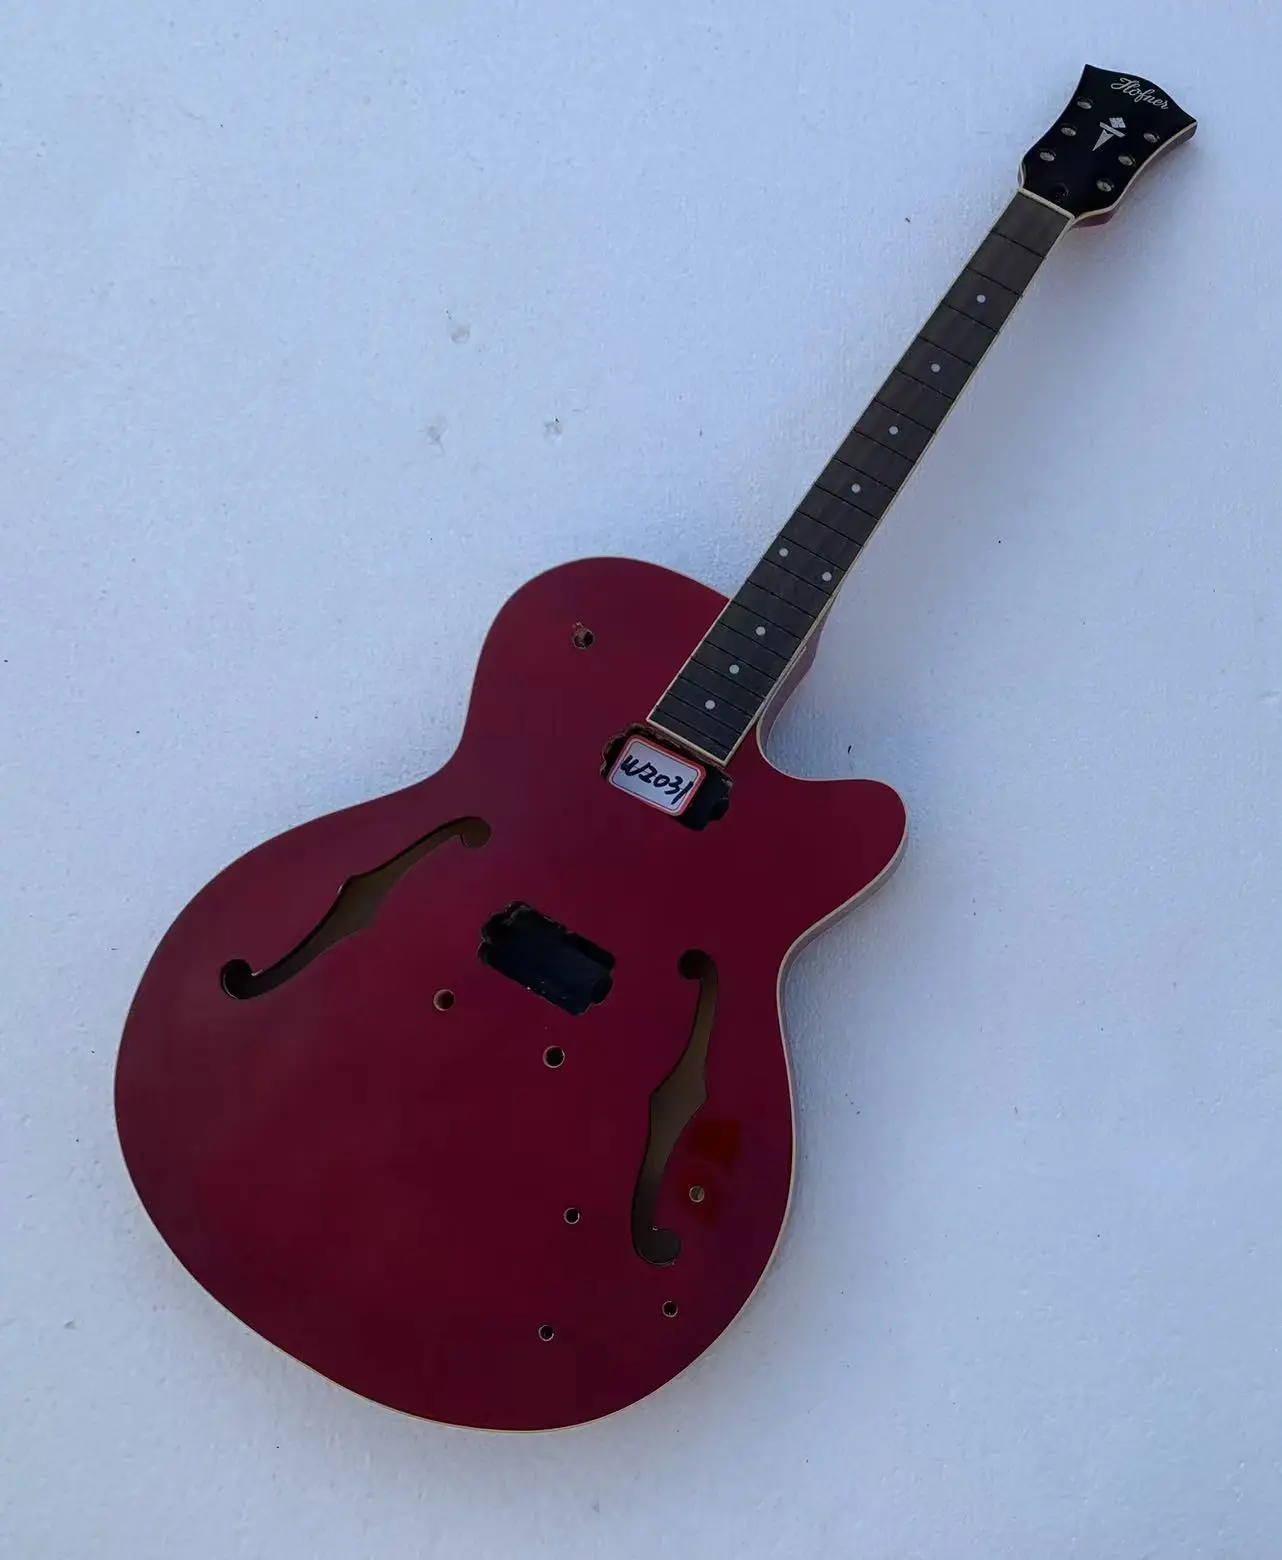 

DIY Original Hofner 6 Strings Electric Guitar HCT-TP Model without Hardwares in Stock Discount Free Shipping W2031